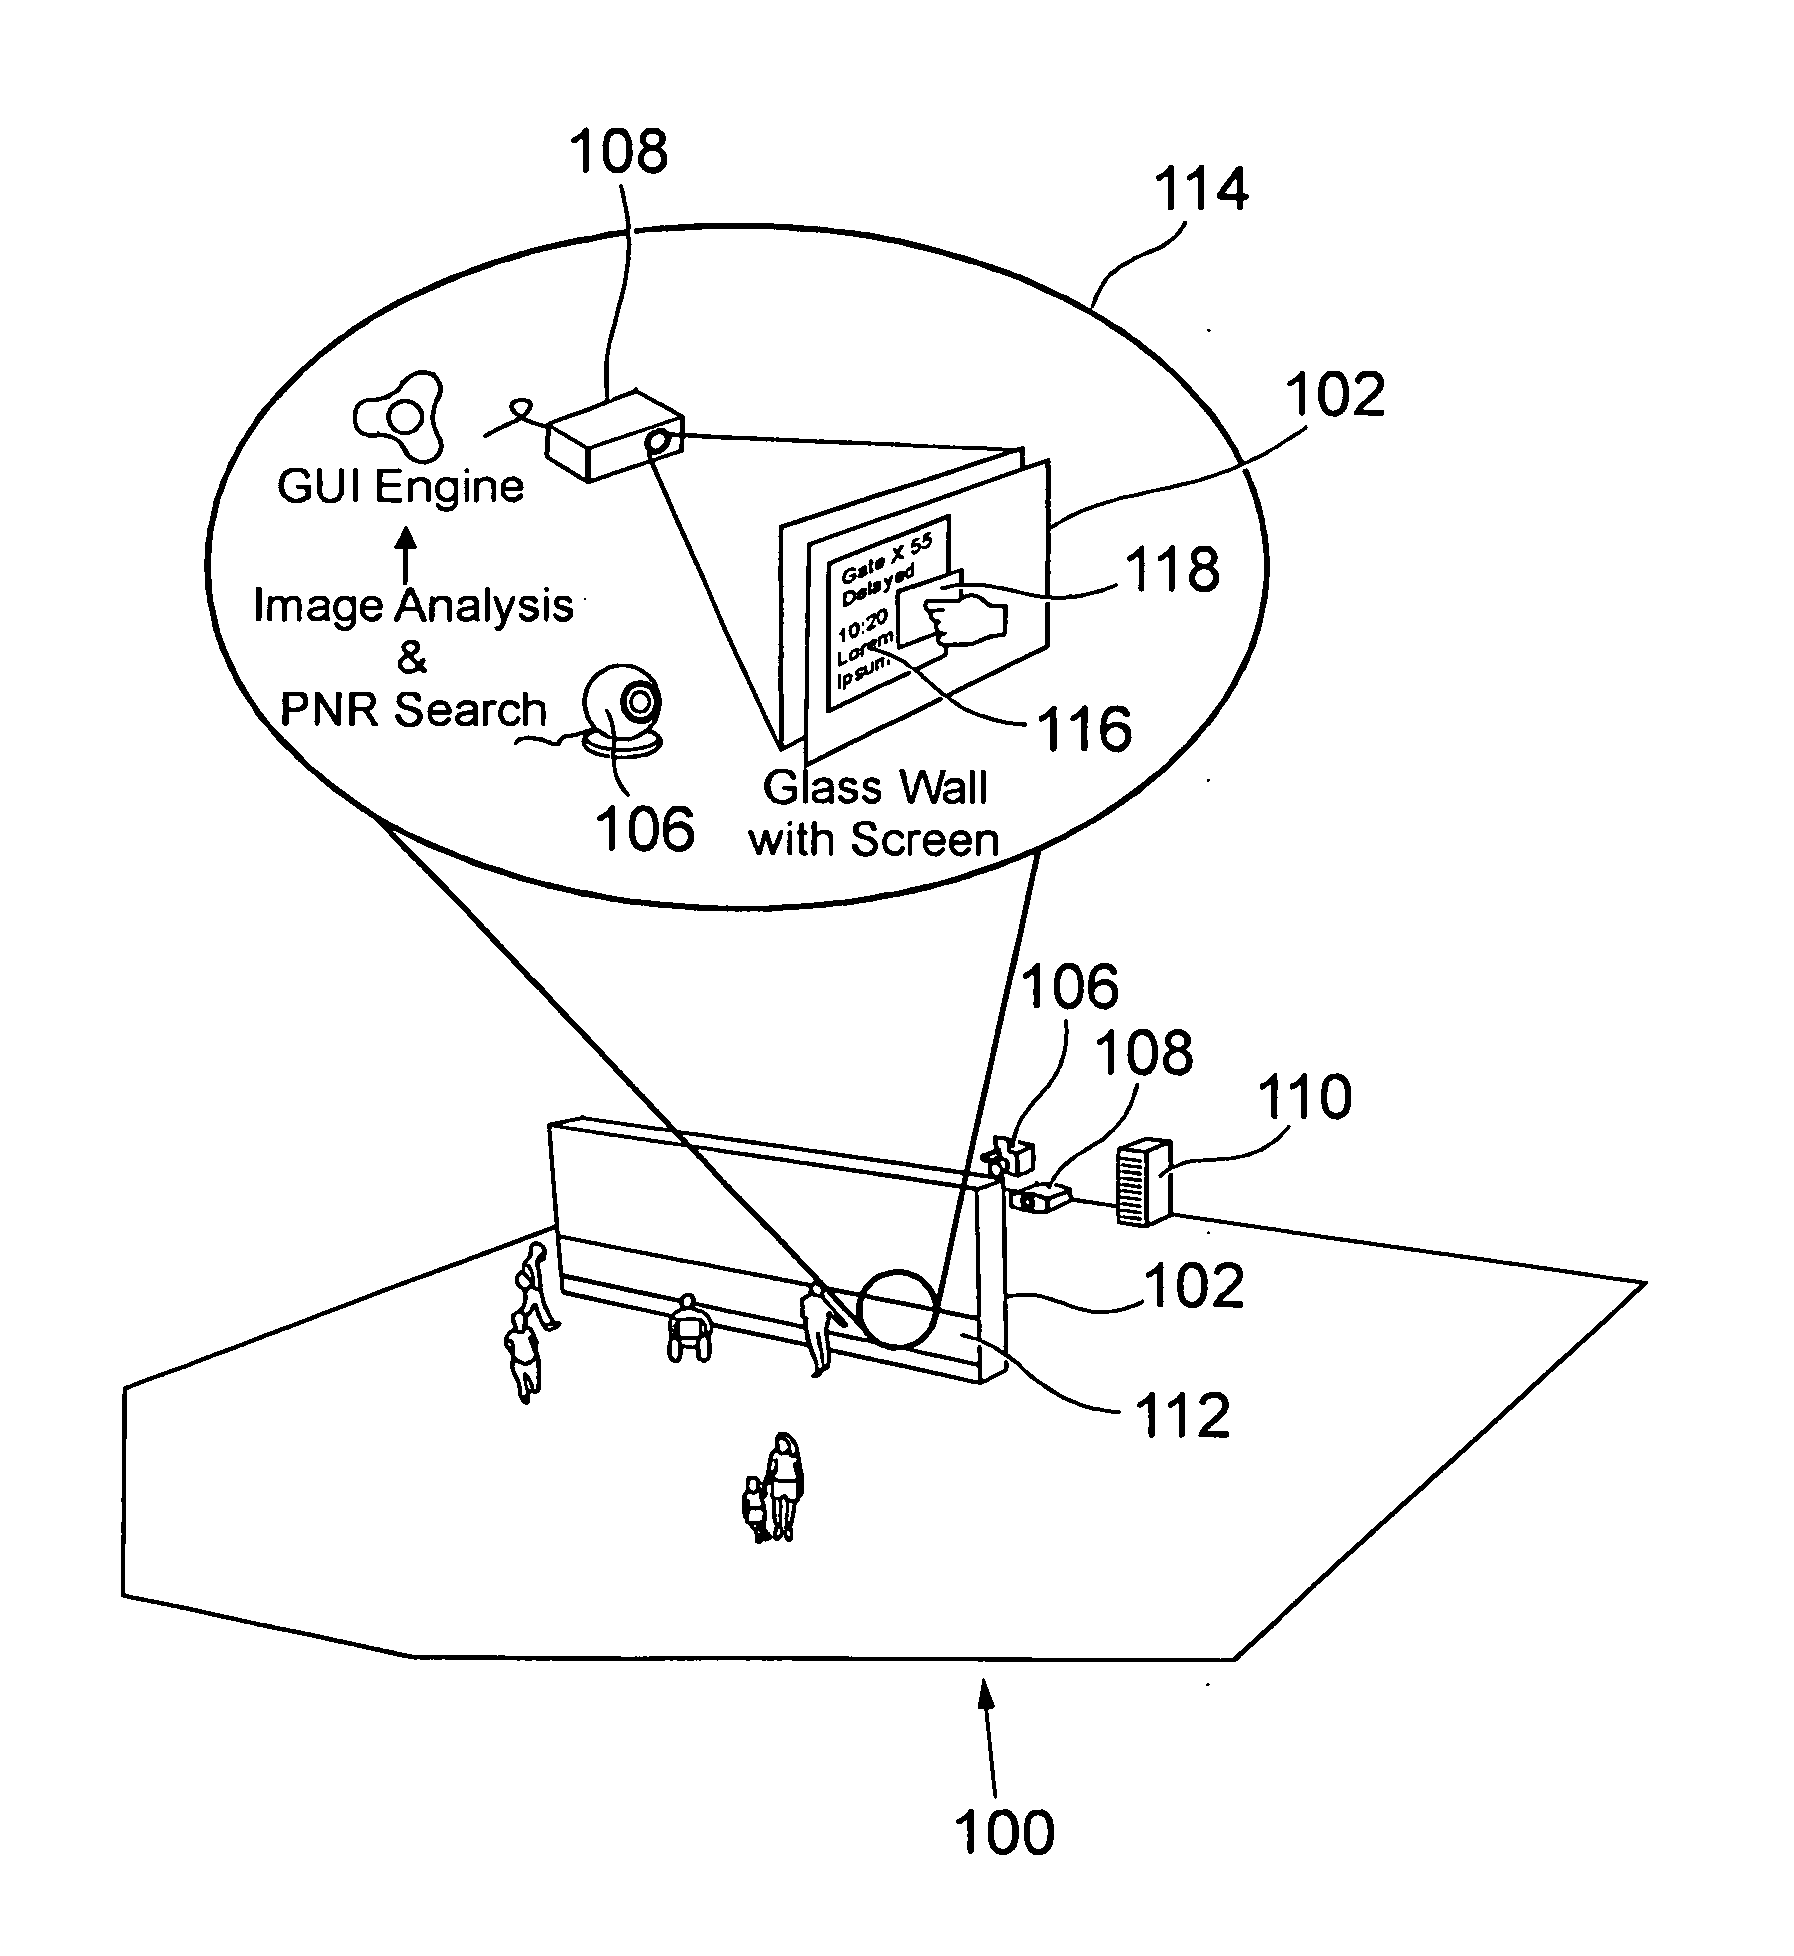 Personal information display system and associated method